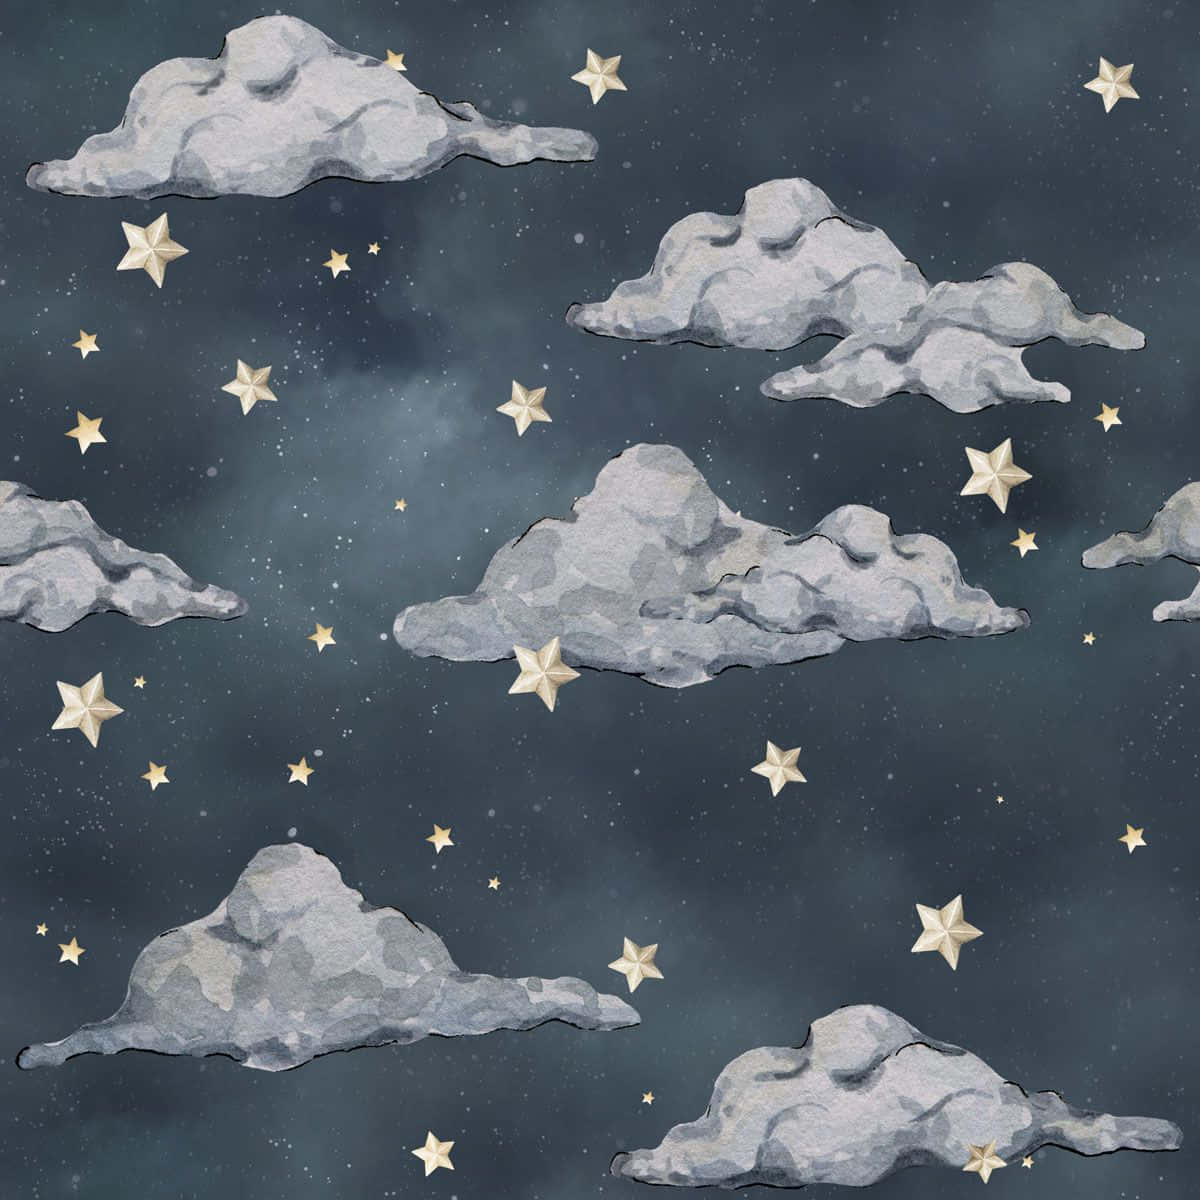 Magical Night Sky With Shining Stars And White Clouds